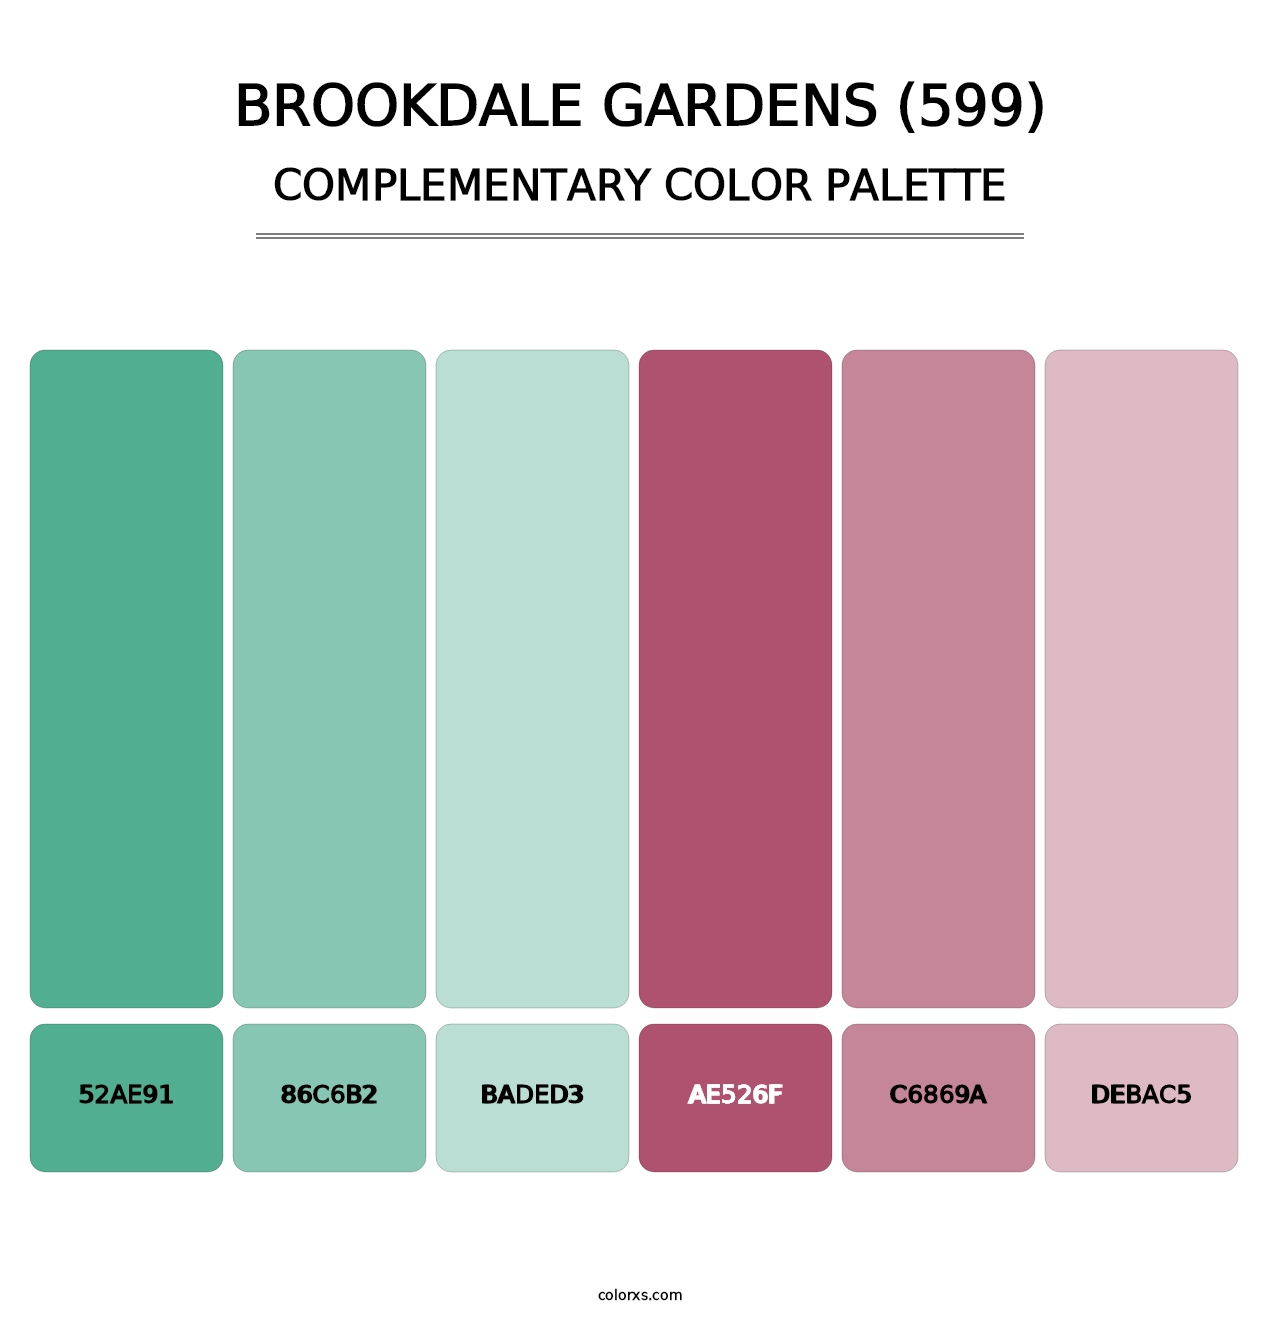 Brookdale Gardens (599) - Complementary Color Palette